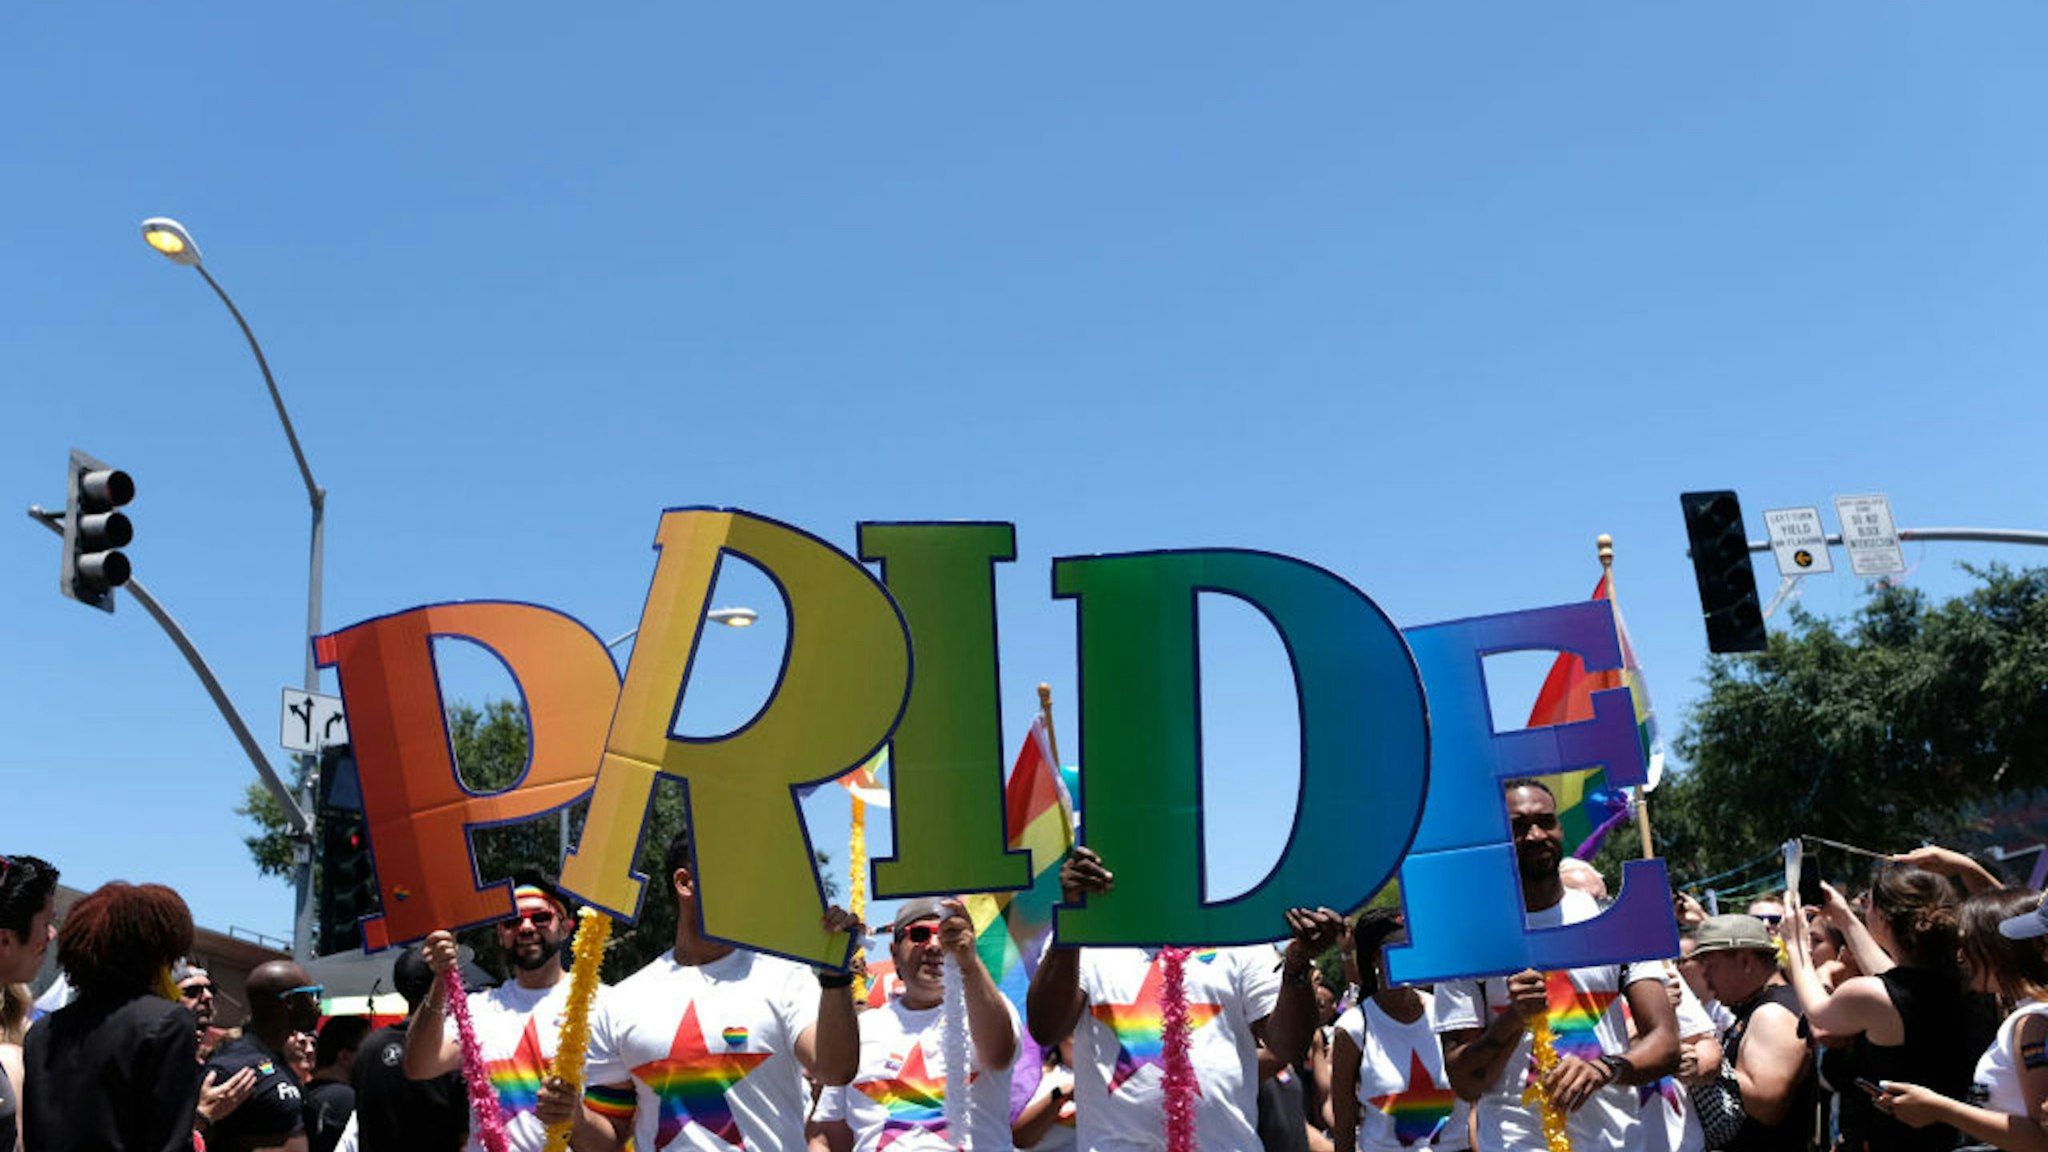 WEST HOLLYWOOD, CALIFORNIA - JUNE 09: A general view of atmosphere at LA Pride 2019 on June 9, 2019 in West Hollywood, California.